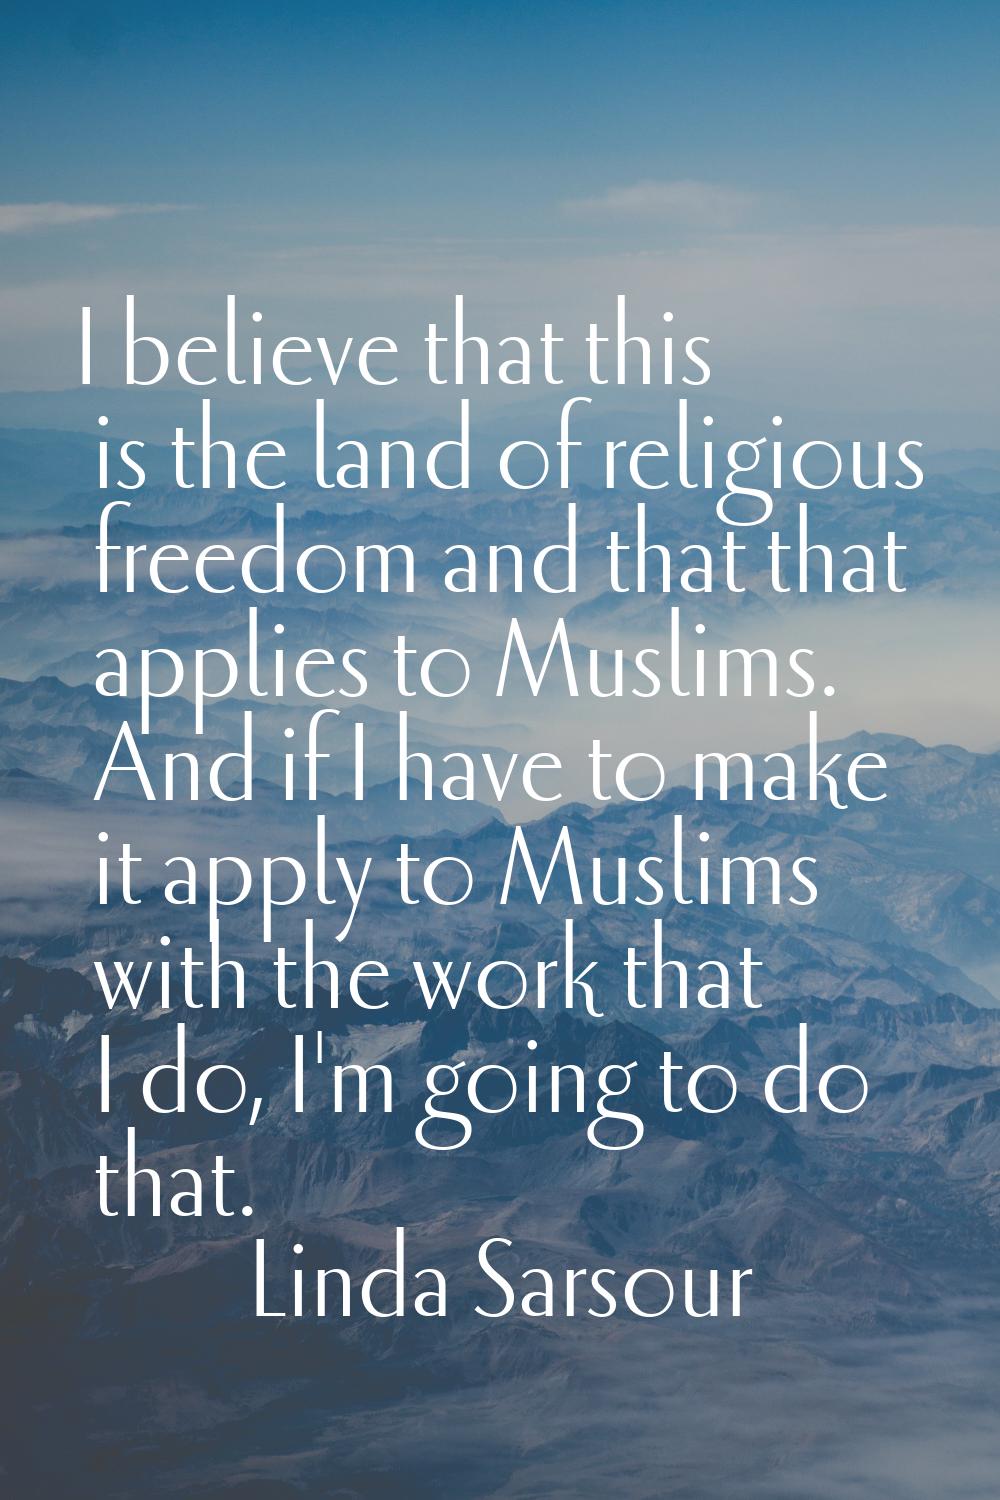 I believe that this is the land of religious freedom and that that applies to Muslims. And if I hav